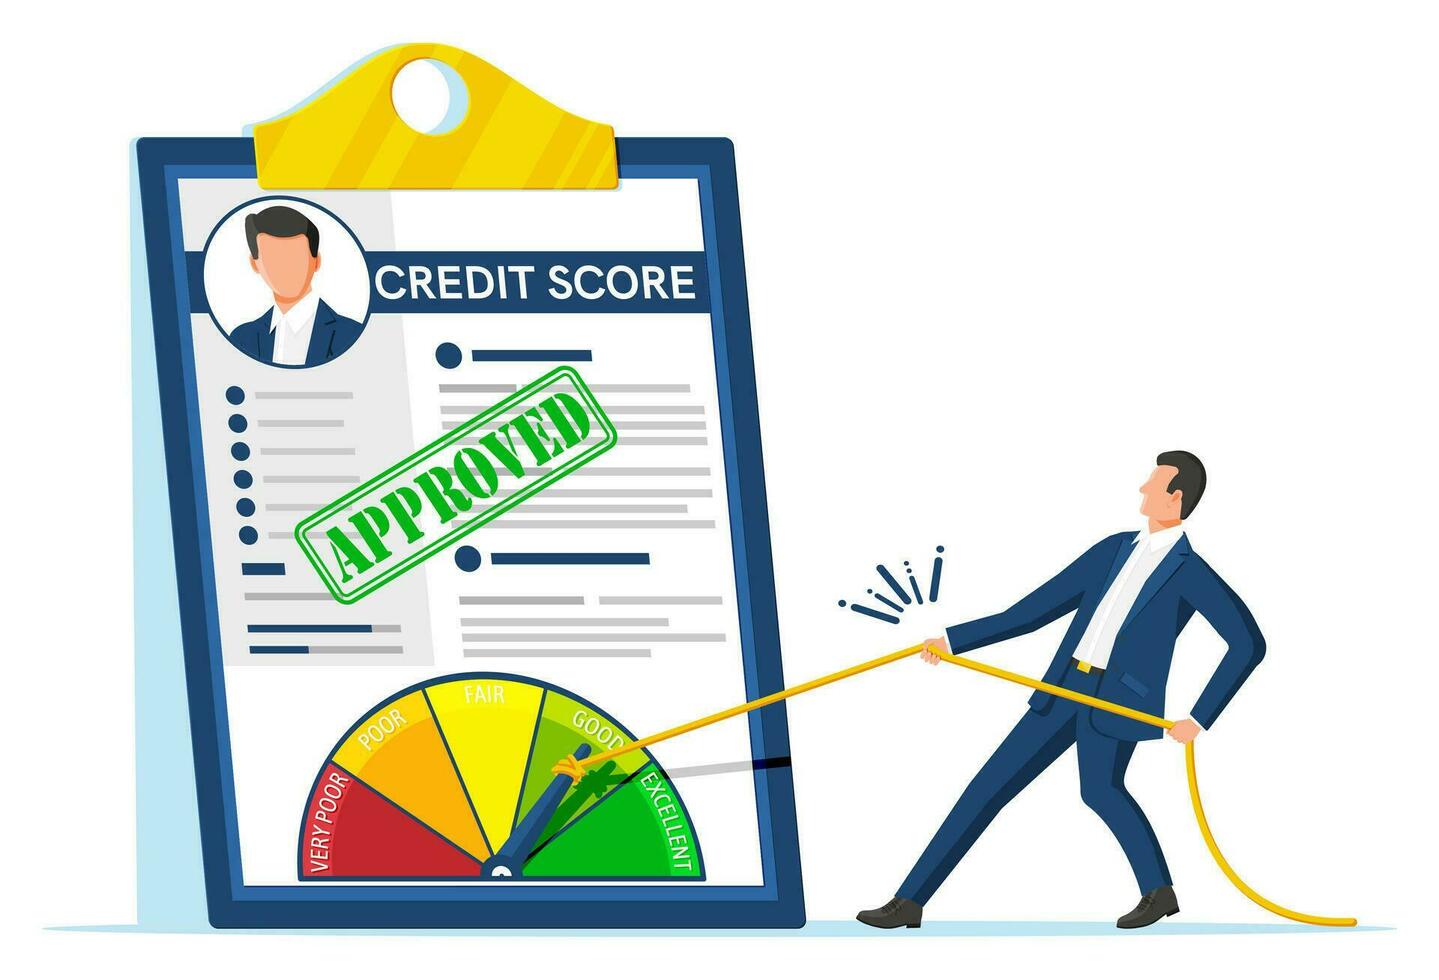 Businessman Changing Personal Credit Information. Man Pushing Arrow to Make Credit History Better. Man Improves his Creditworthiness, Credit Score, Approval Solvency. Flat Vector Illustration